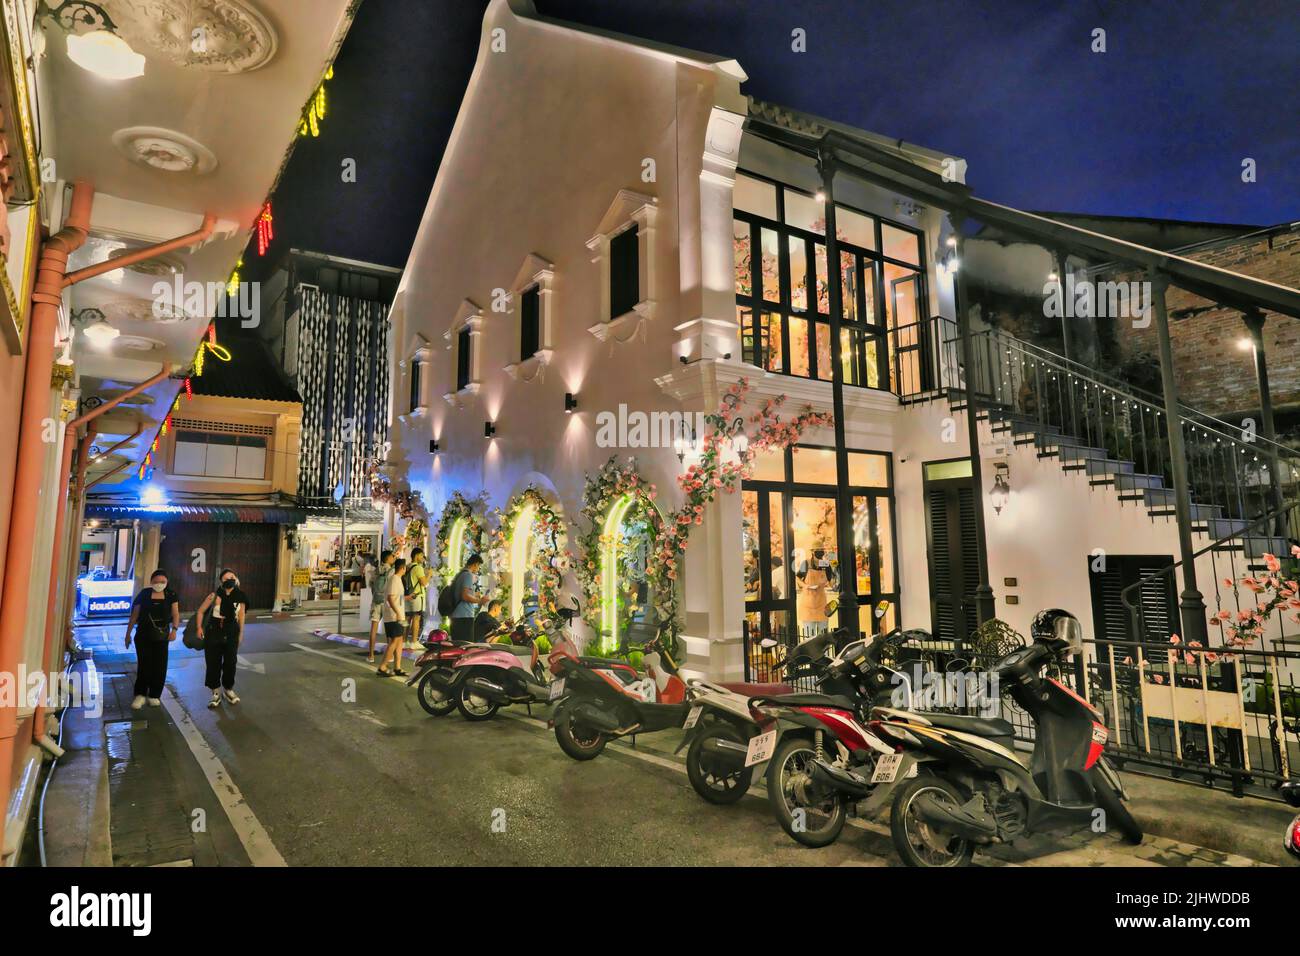 Dusk falls on picturesque Soi Rommanee (Rommani) in the Old Town heritage area of Phuket Town, Thailand; the house on the right: Aung Ku Cafe Stock Photo